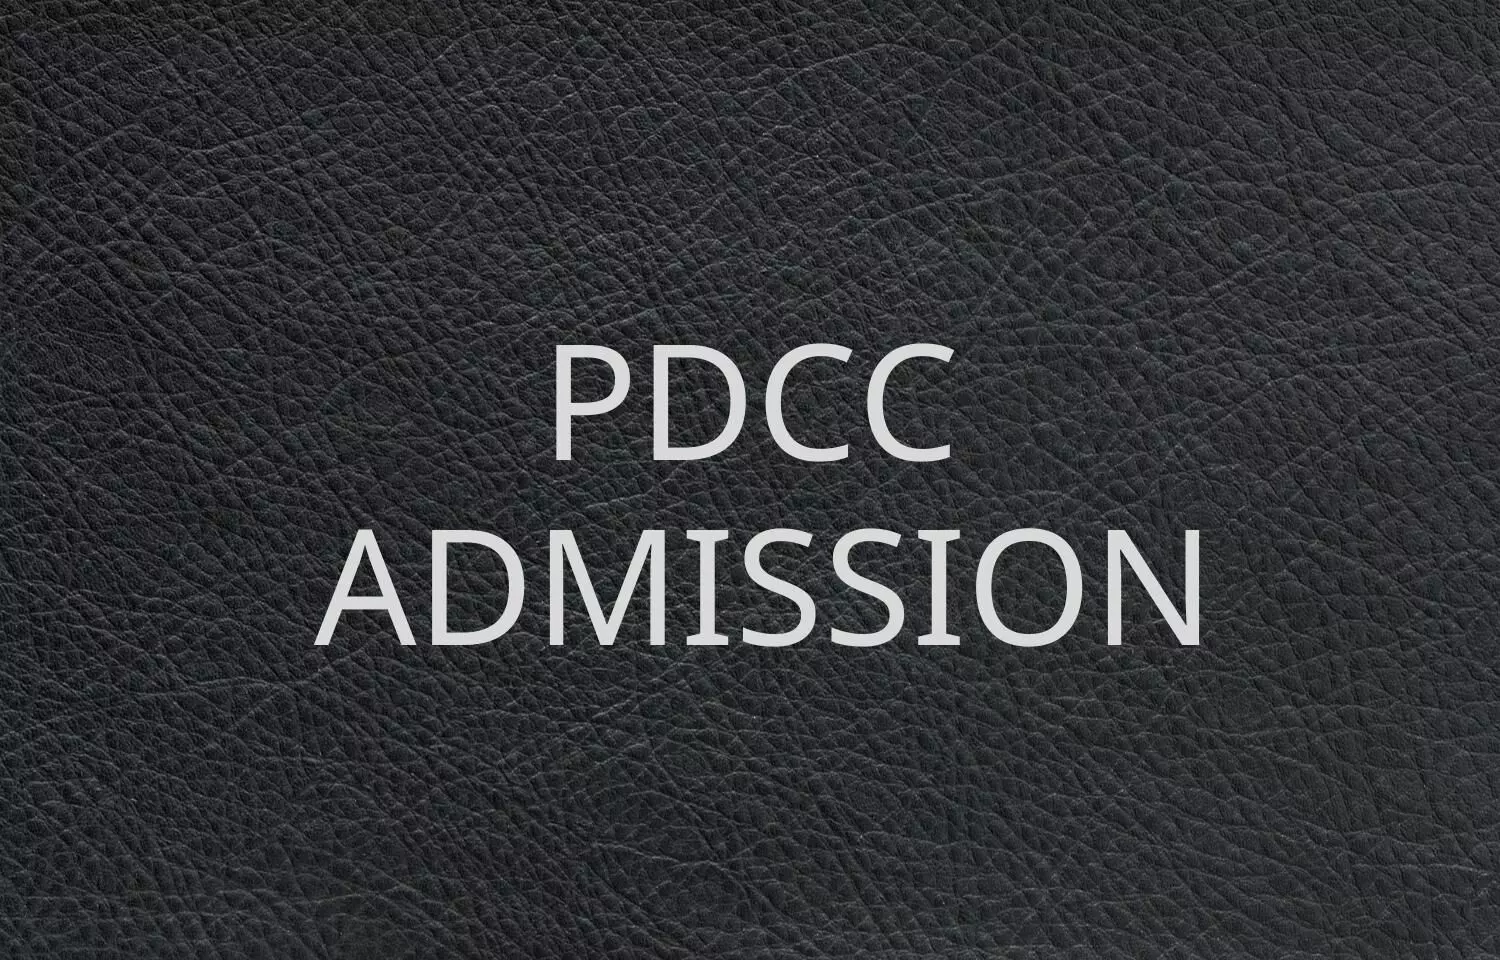 PDCC, PDF Admissions: JIPMER issues notice for Waitlist Candidates, details